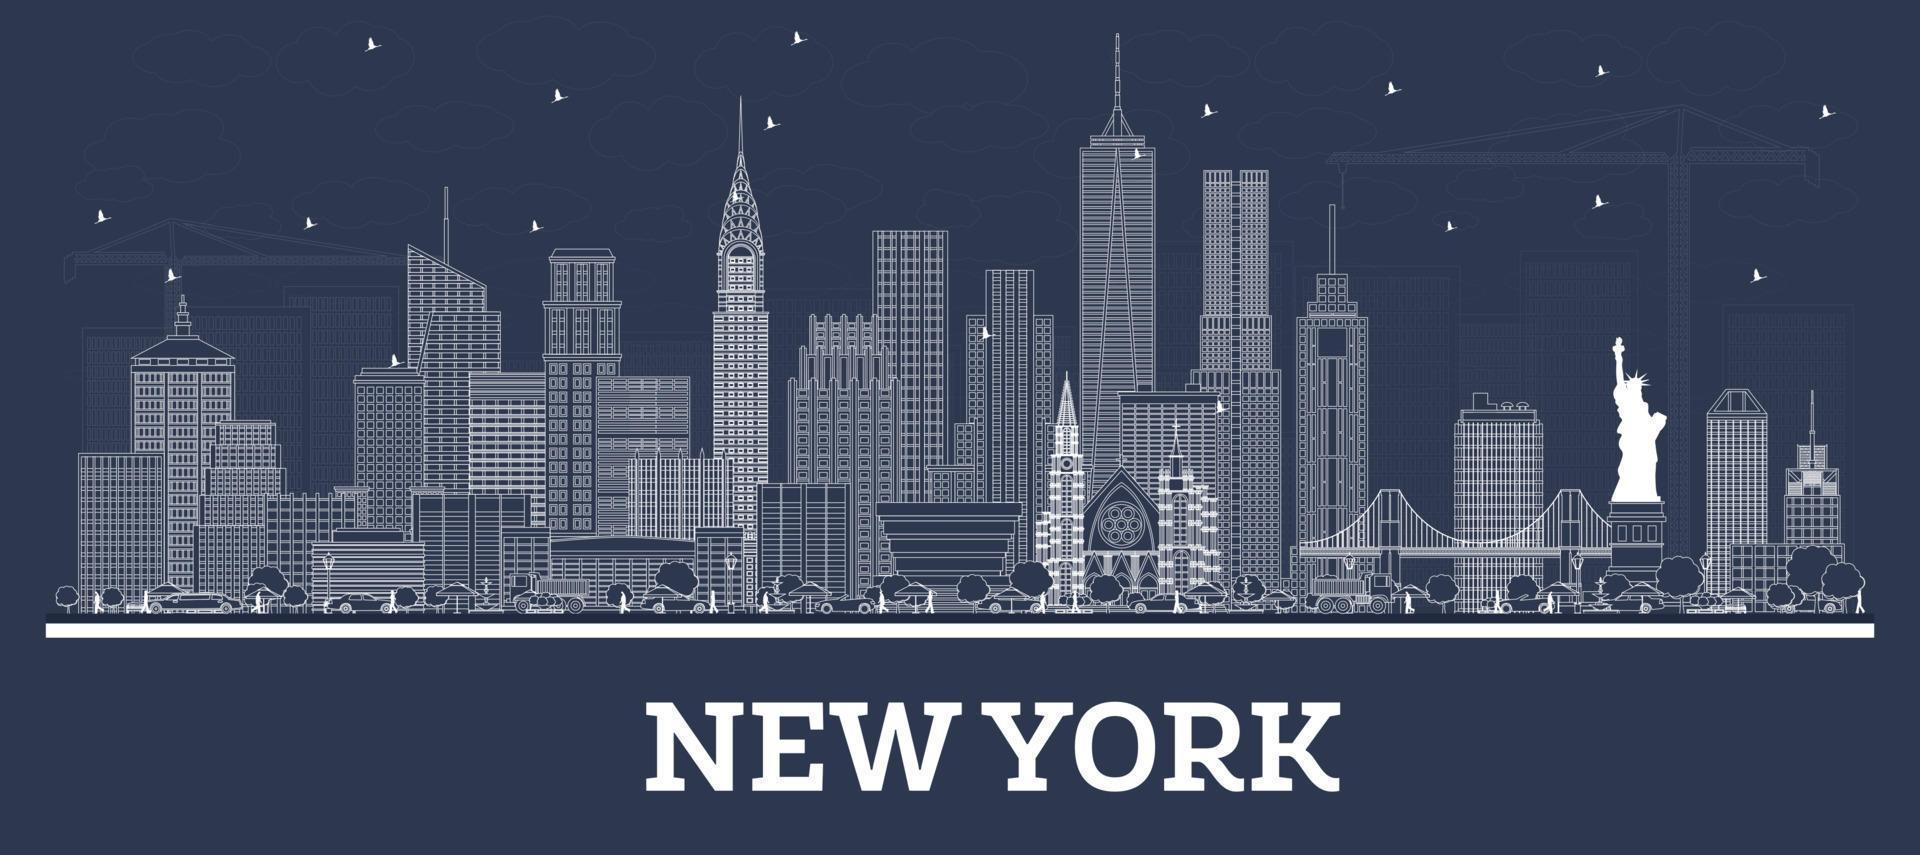 Outline New York USA City Skyline with White Buildings. vector